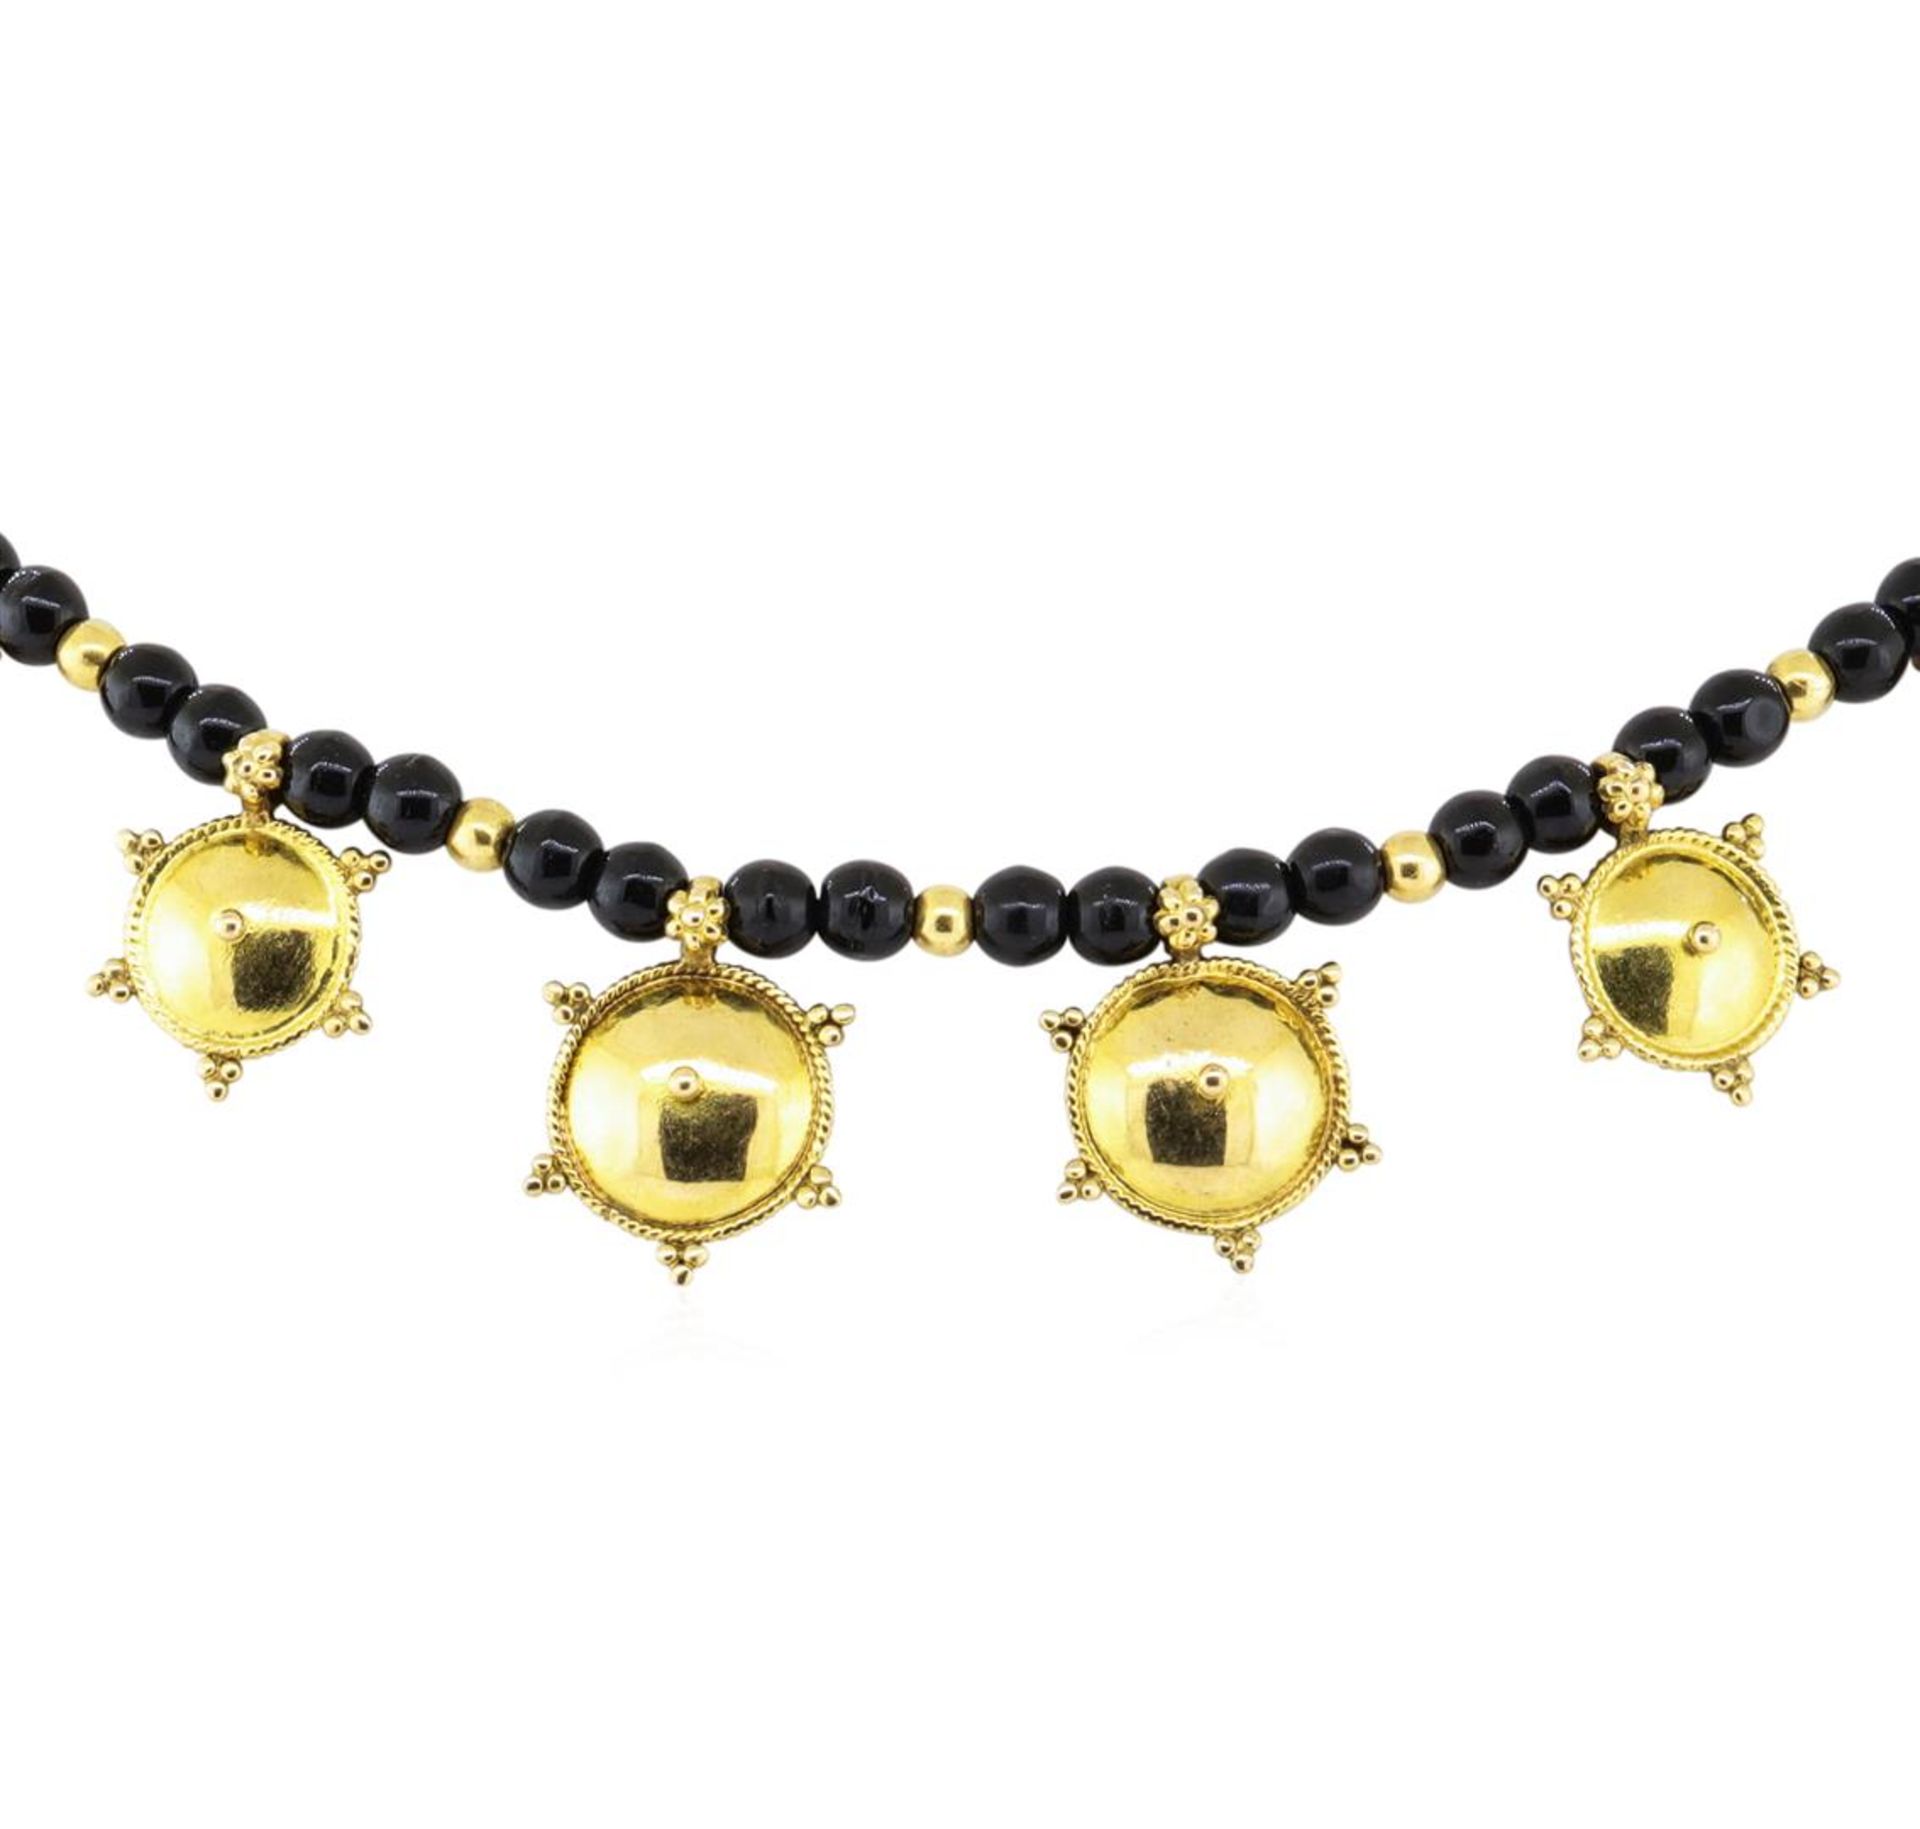 16 Inch Black Bead Station Necklace - 22KT Yellow Gold - Image 2 of 2